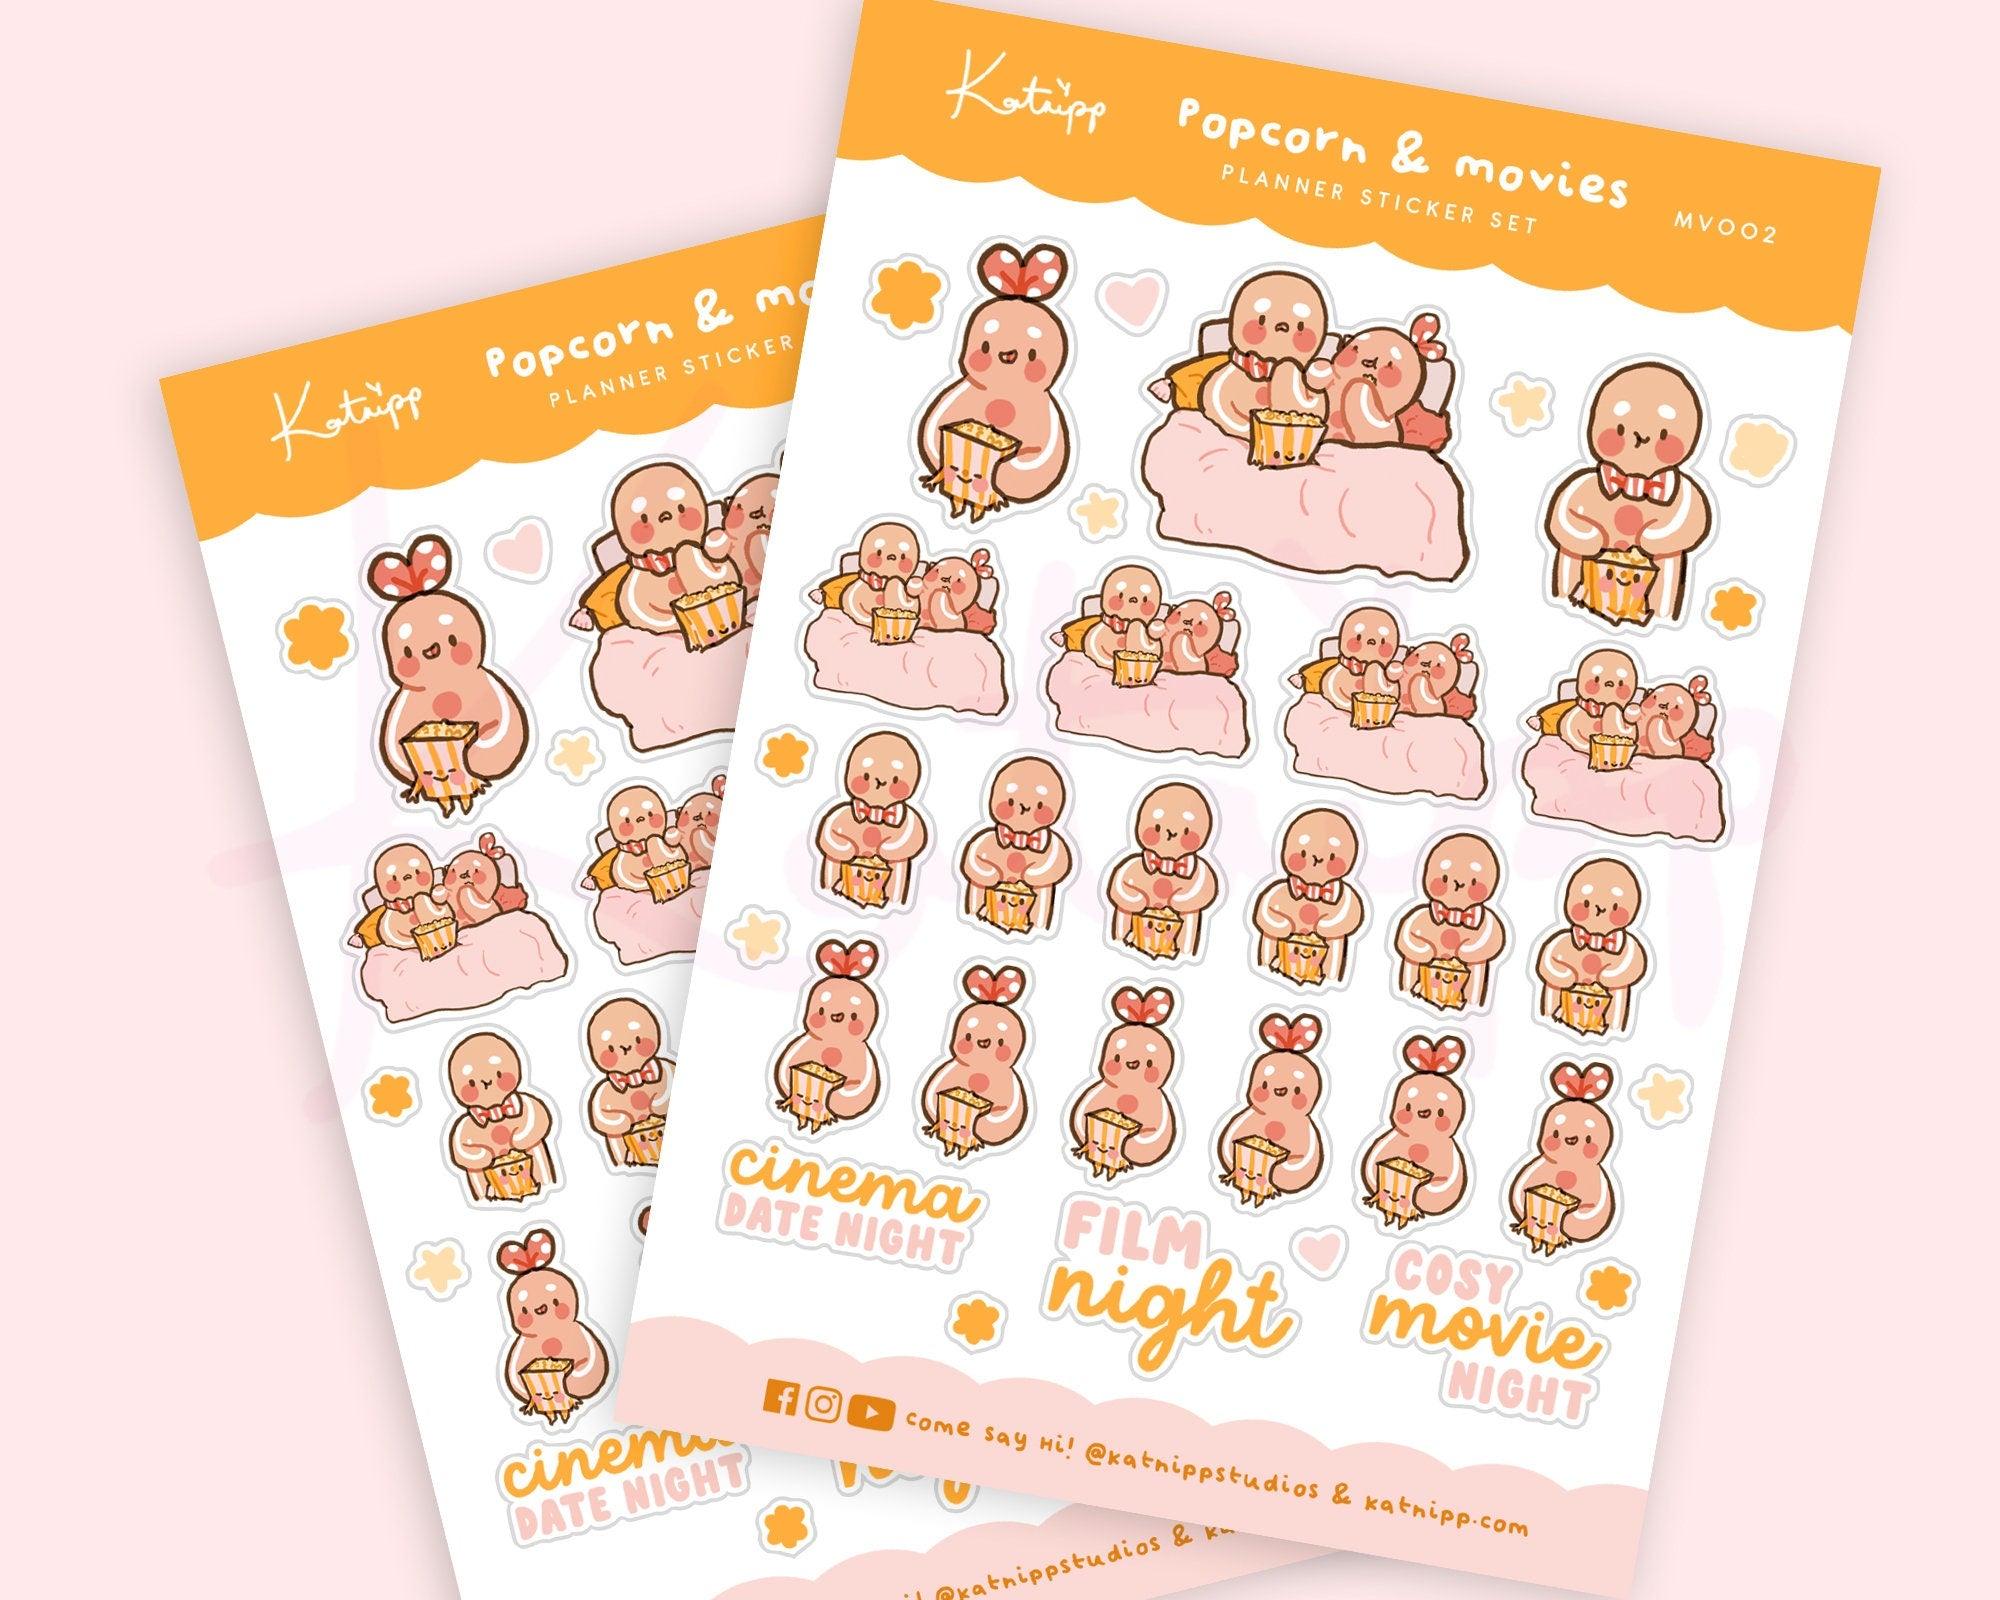 Happy Mail Packages Bujo Deco Planner Stickers – Paper Kay